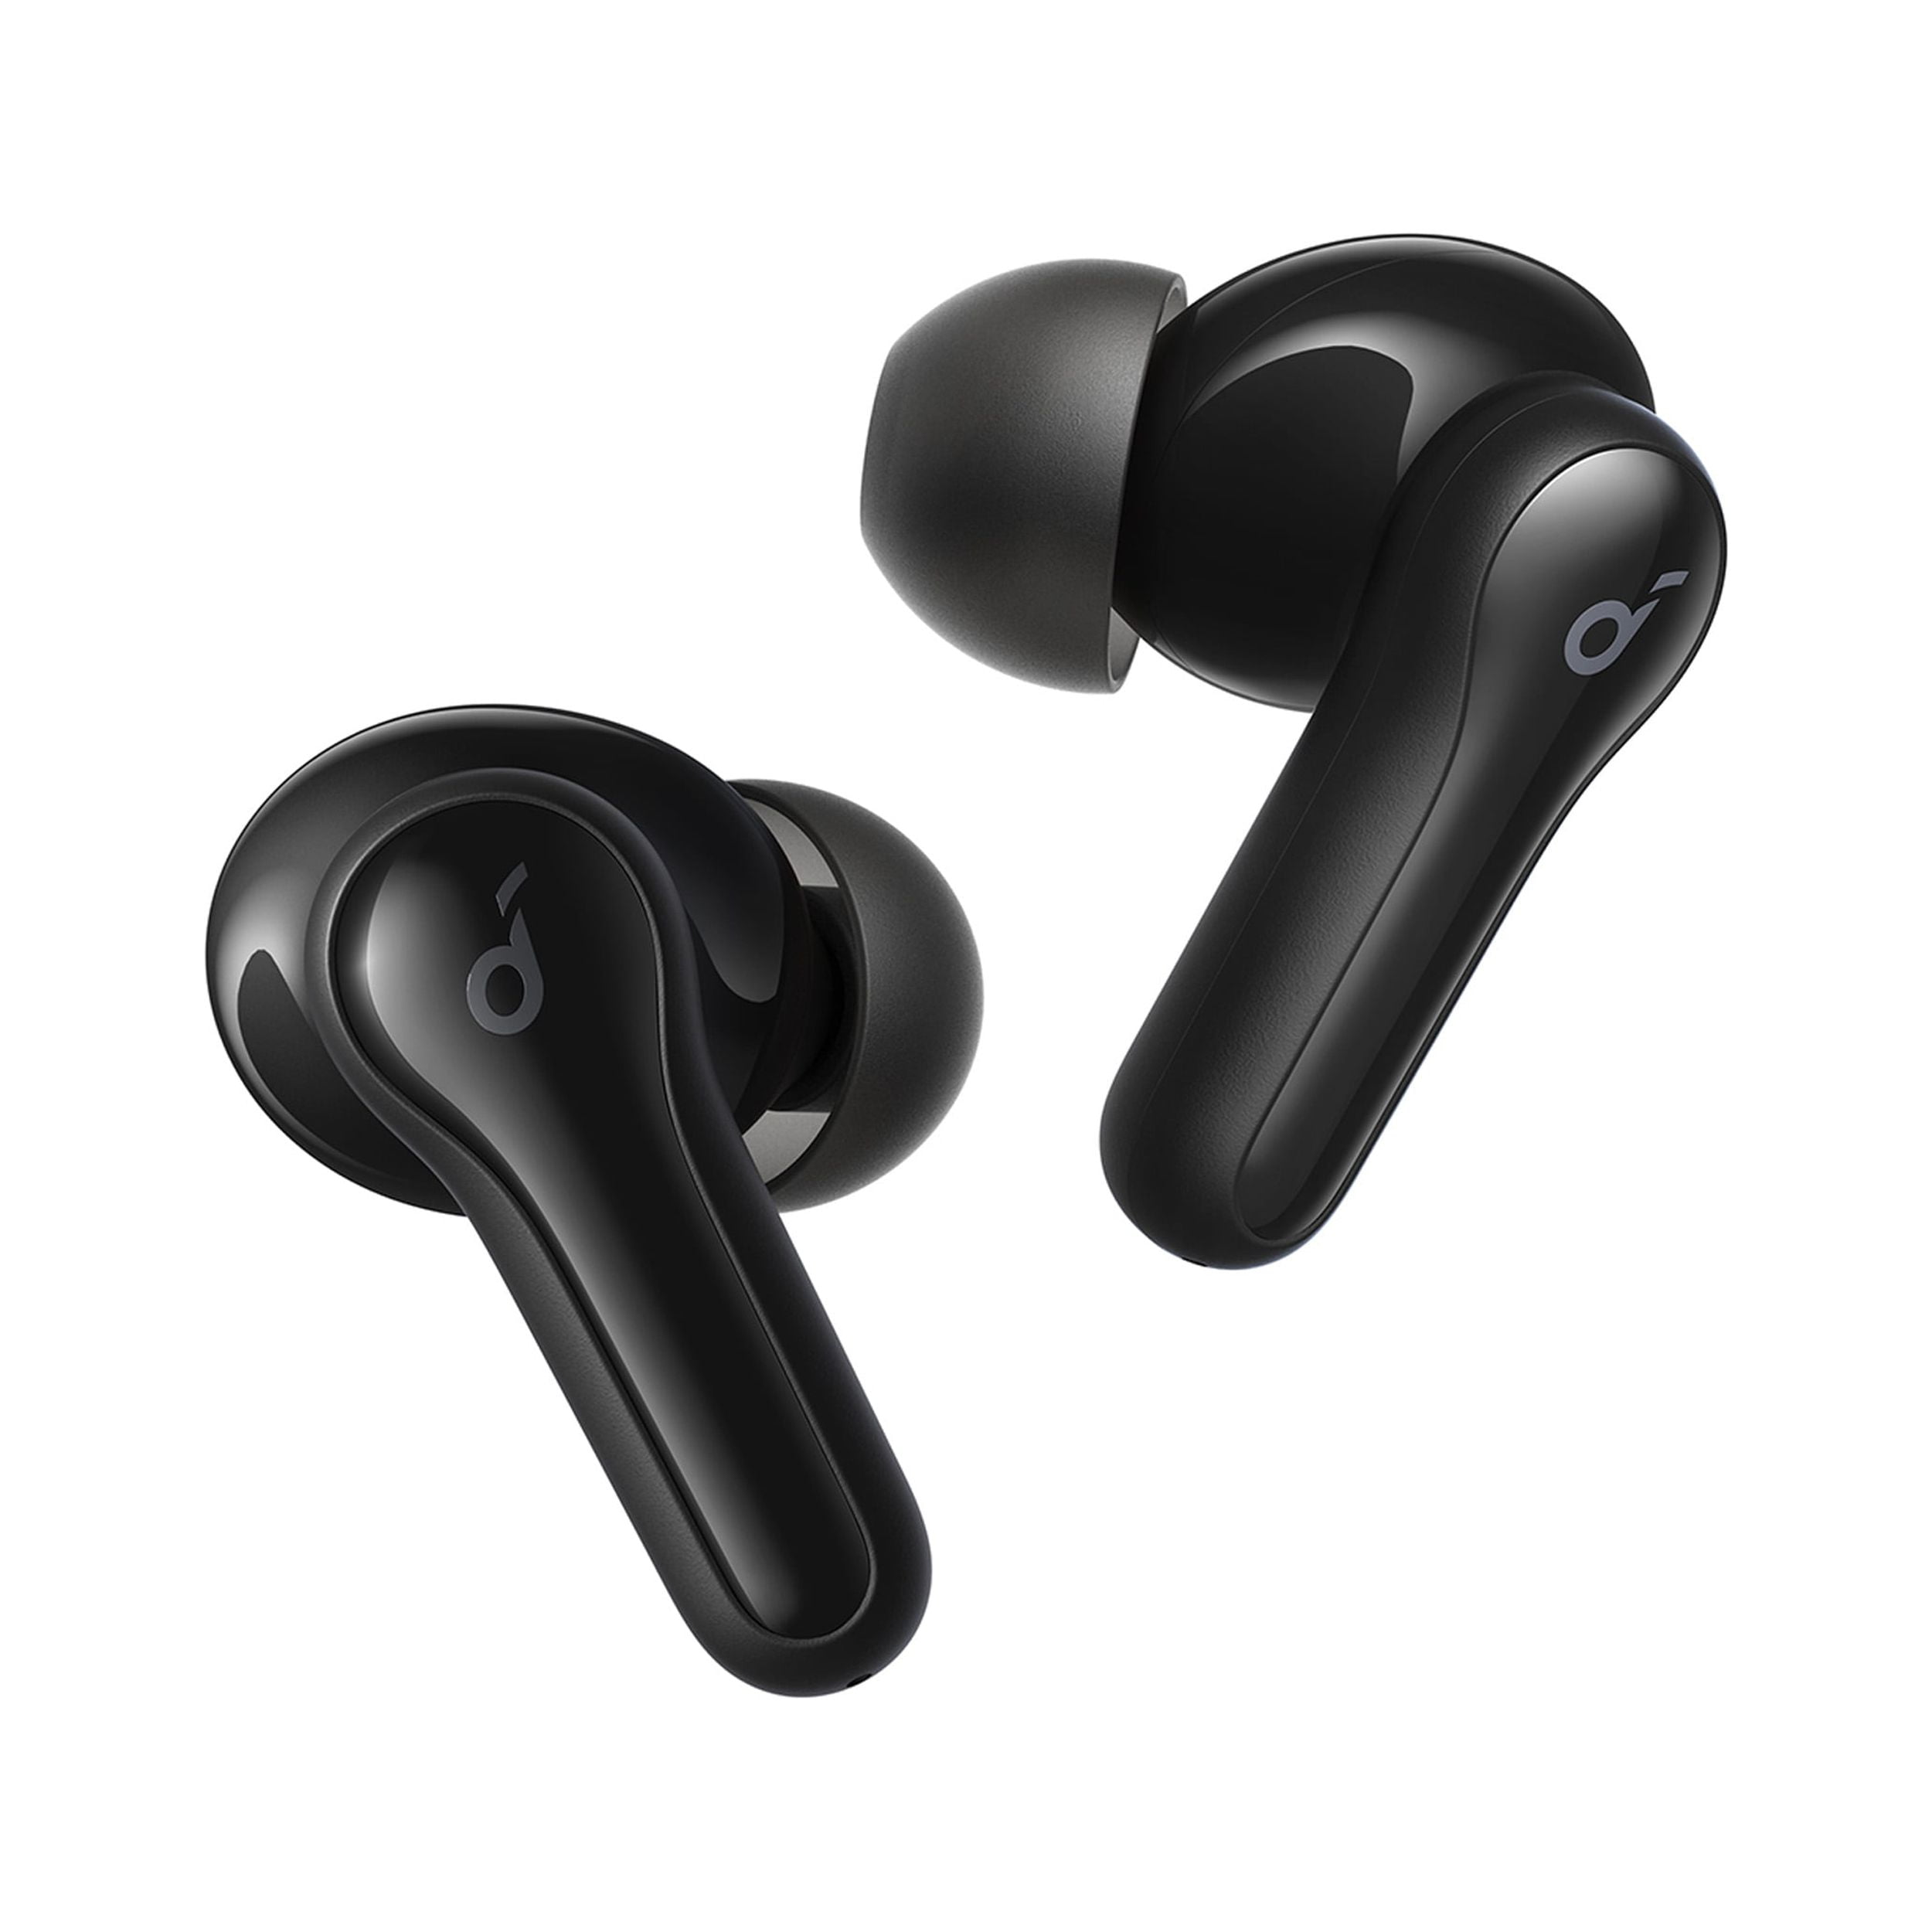  Soundcore by Anker Life P3 Noise Cancelling Earbuds with Life  Q20 Active Noise Cancelling Headphones, Multi-Mode Active Noise Cancelling,  Thumping Bass, 6 Mics for Calls, 35H Playtime, App Control : Electronics